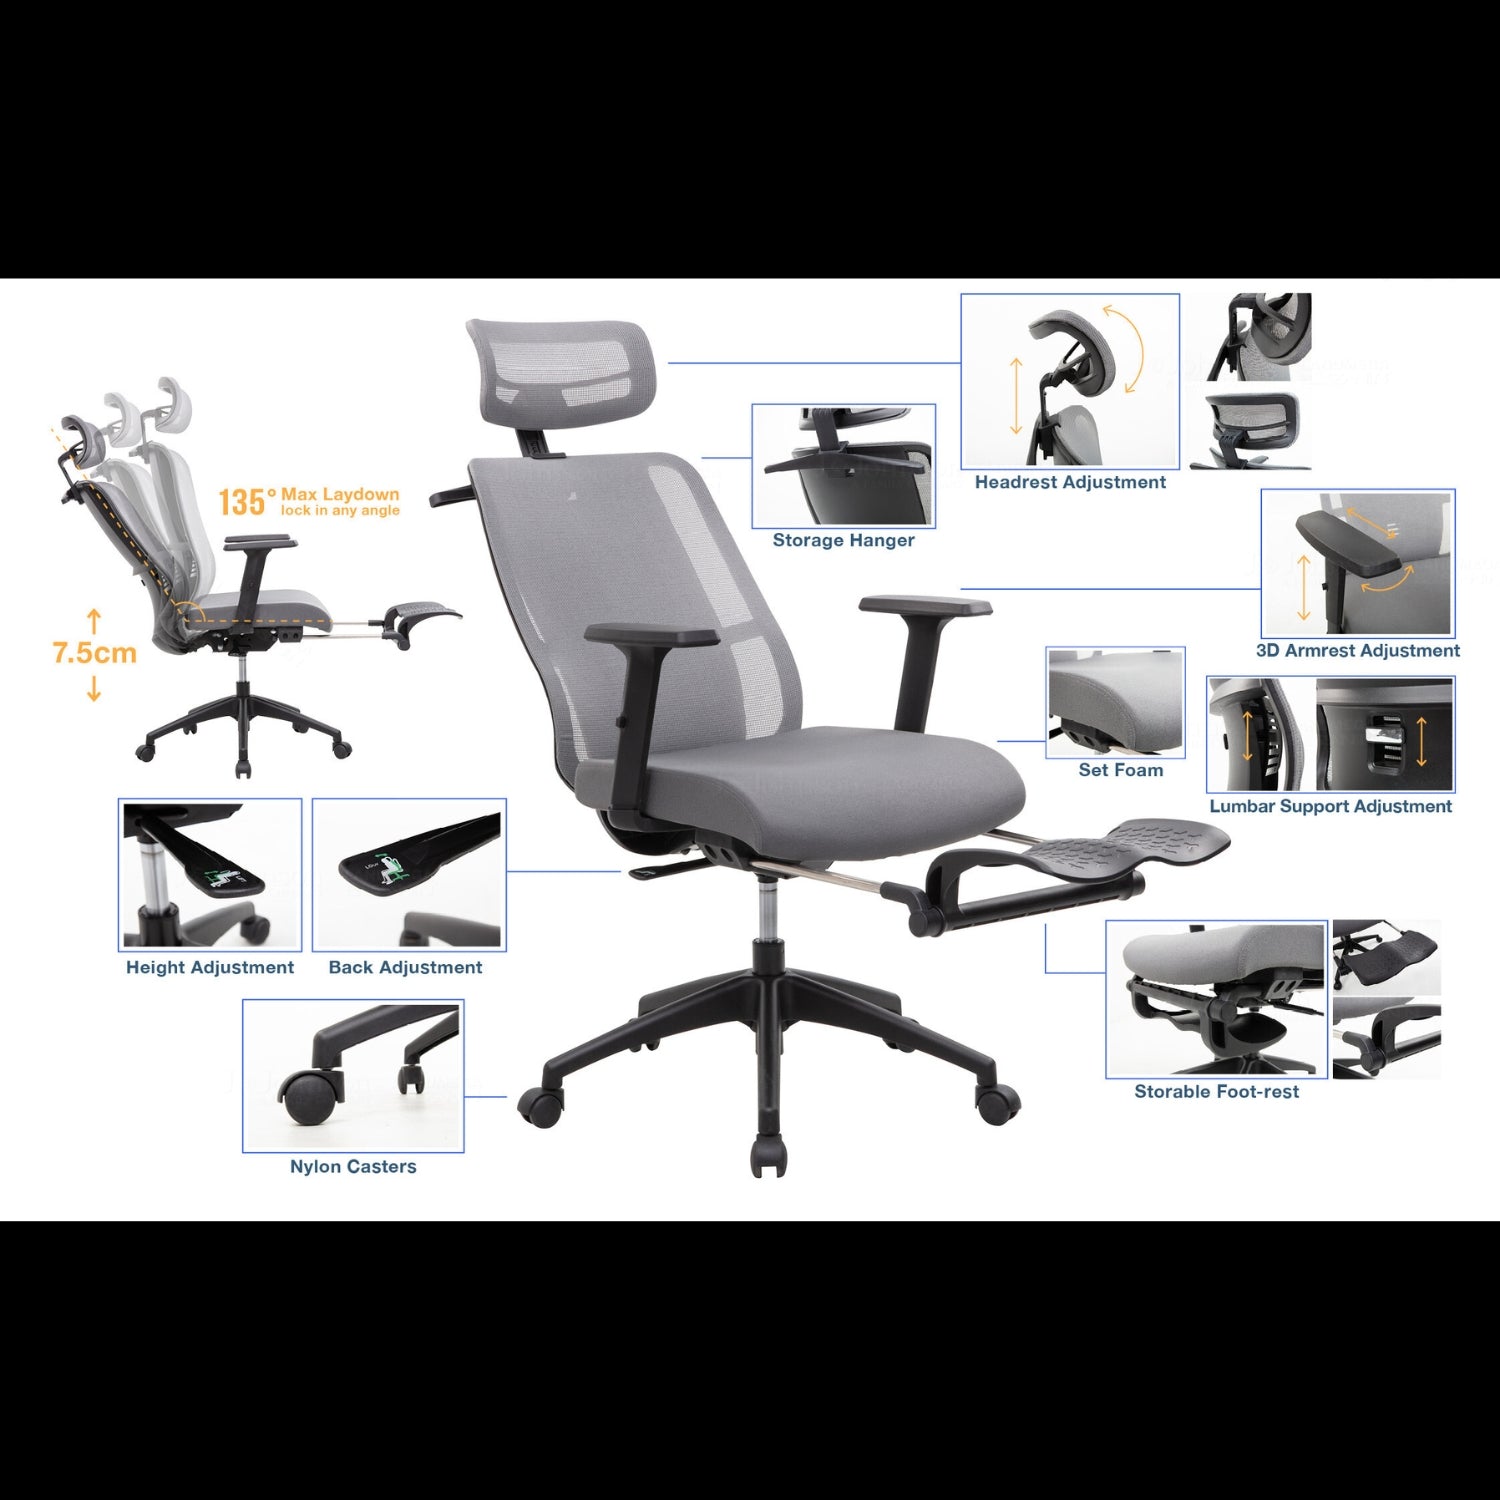 Kyona ergonomic office chair with all its functions parts and accessories including armrests wheels and adjustable height.